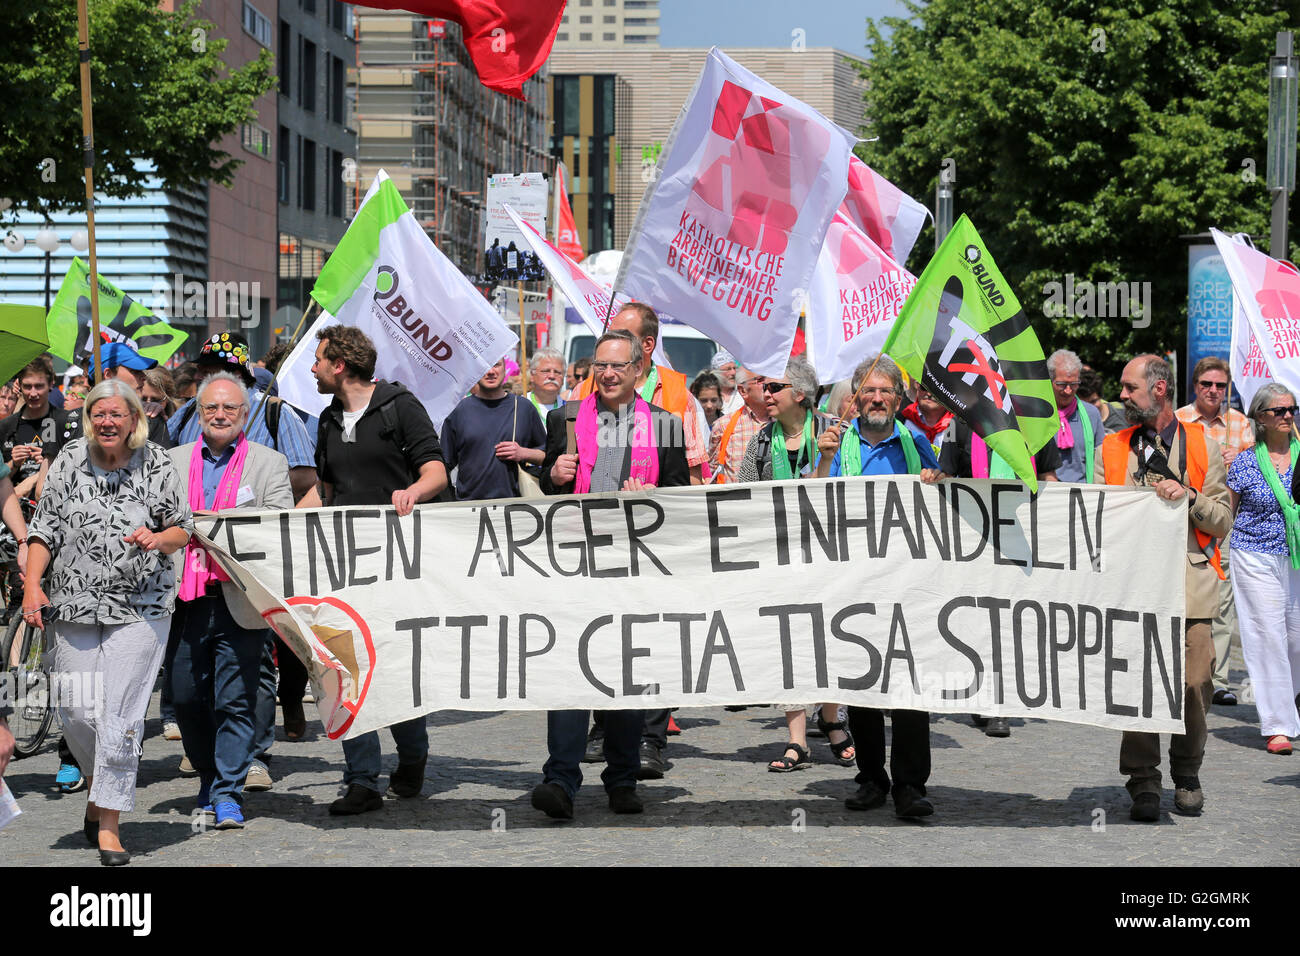 Campaigners against TTIP (Transatlantic Trade and Investment Partnership) hold banners during a demonstration demonstration in Leipzig, Germany, May 2016 Stock Photo